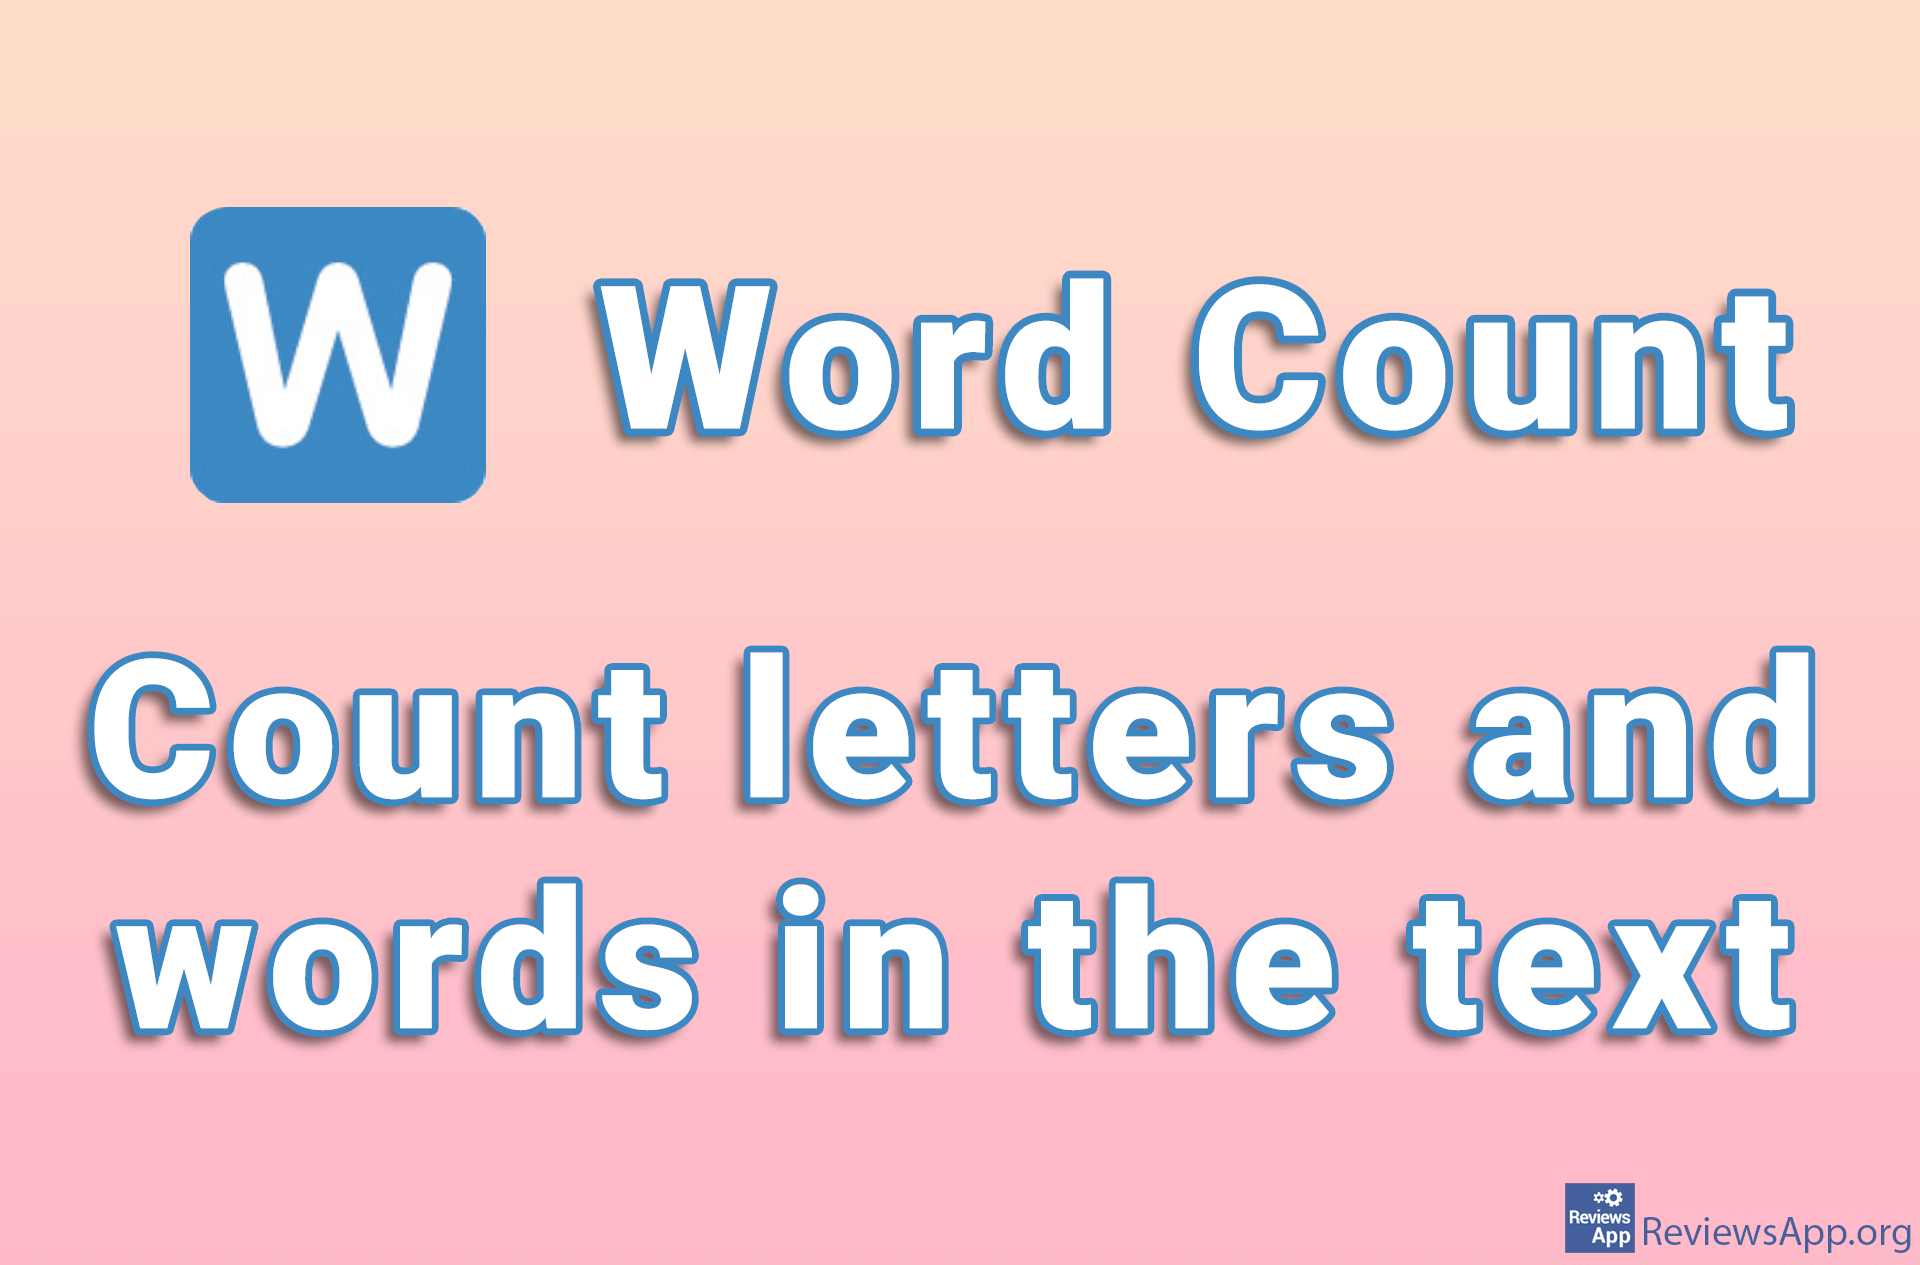 word-count-count-letters-and-words-in-the-text-reviews-app